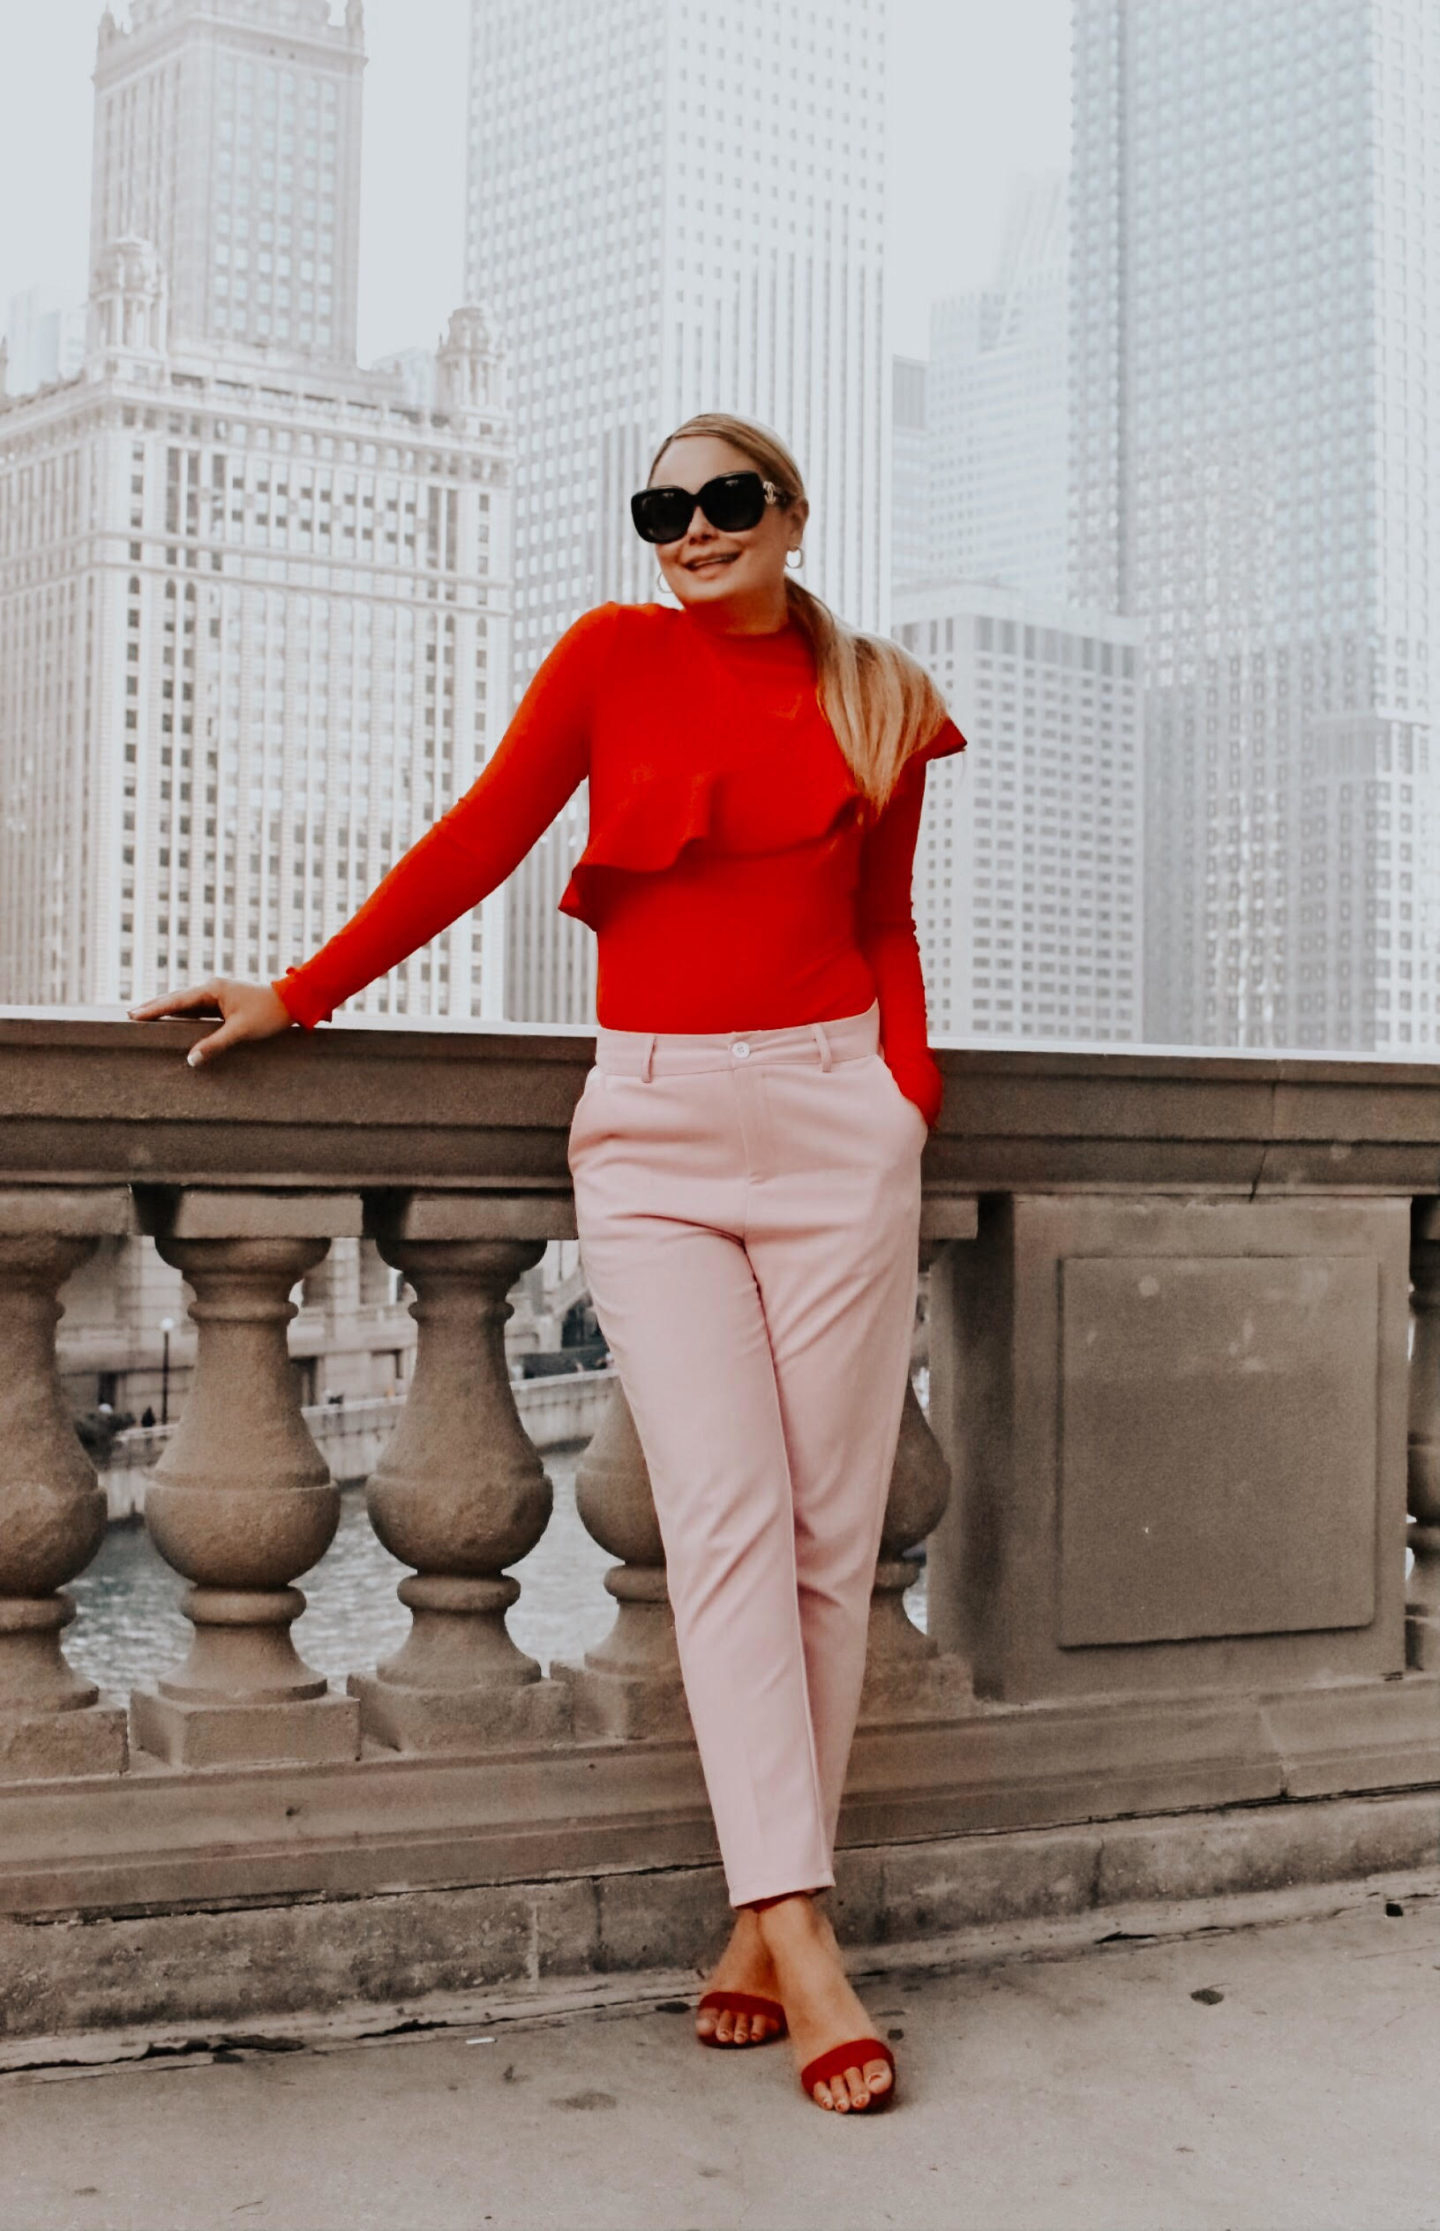 https://www.whatwouldvwear.com/wp-content/uploads/2019/07/pink-pants-red-blouse-chicago-skyline-vanessa-lambert-blog-whatwouldvwear-2-1440x2231.jpg